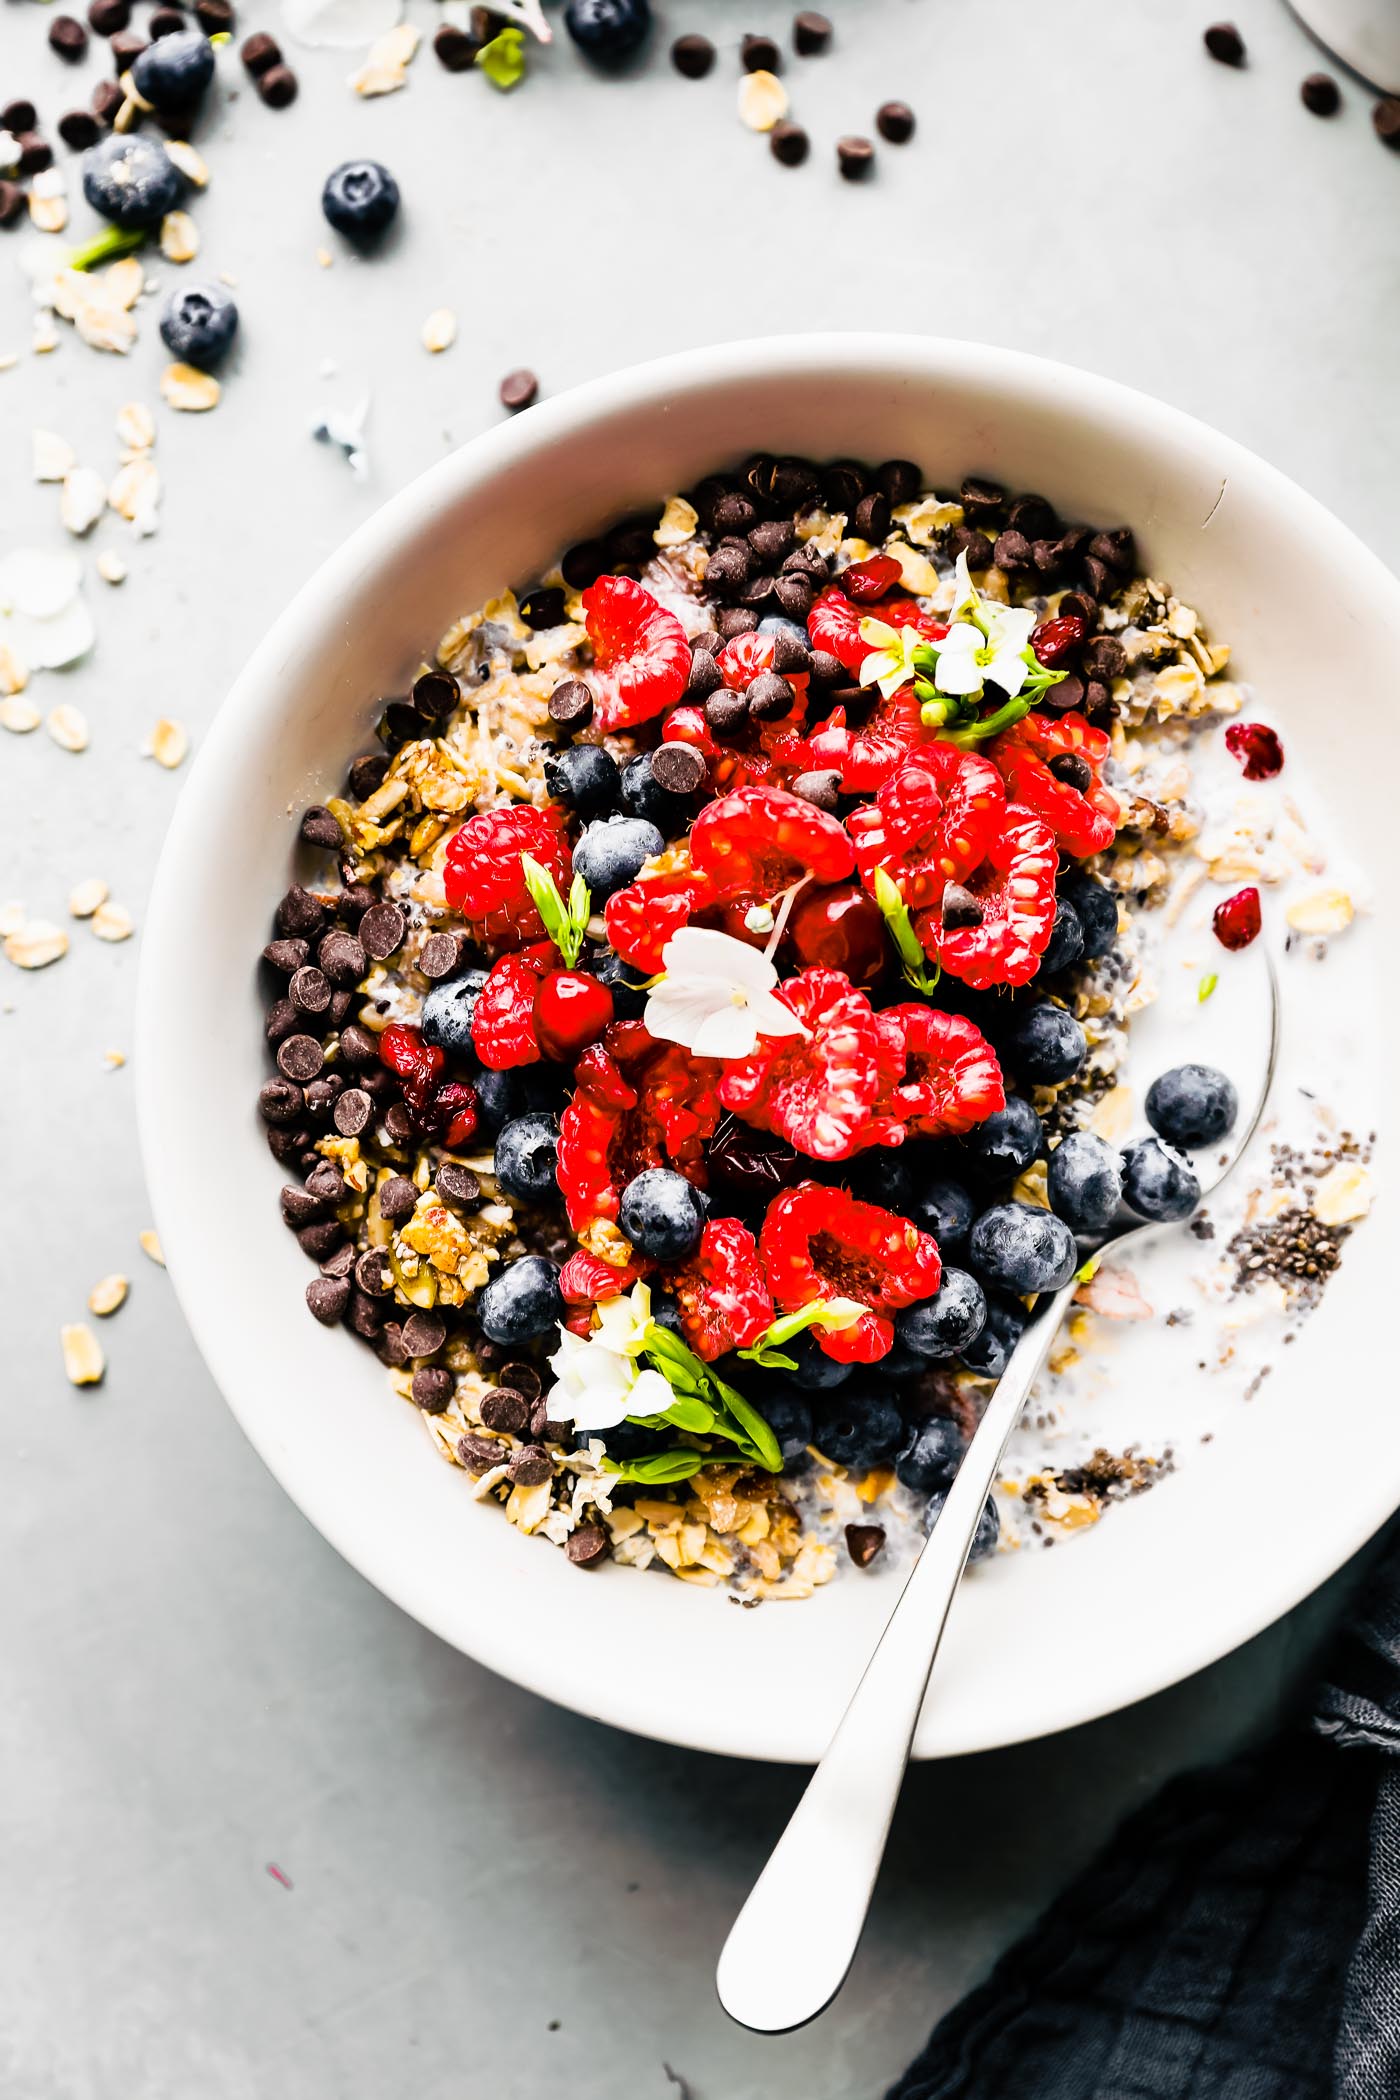 Overhead view breakfast powder bowl with grains and seeds in white bowl, topped with mini chocolate chips, fresh fruit and small flowers.